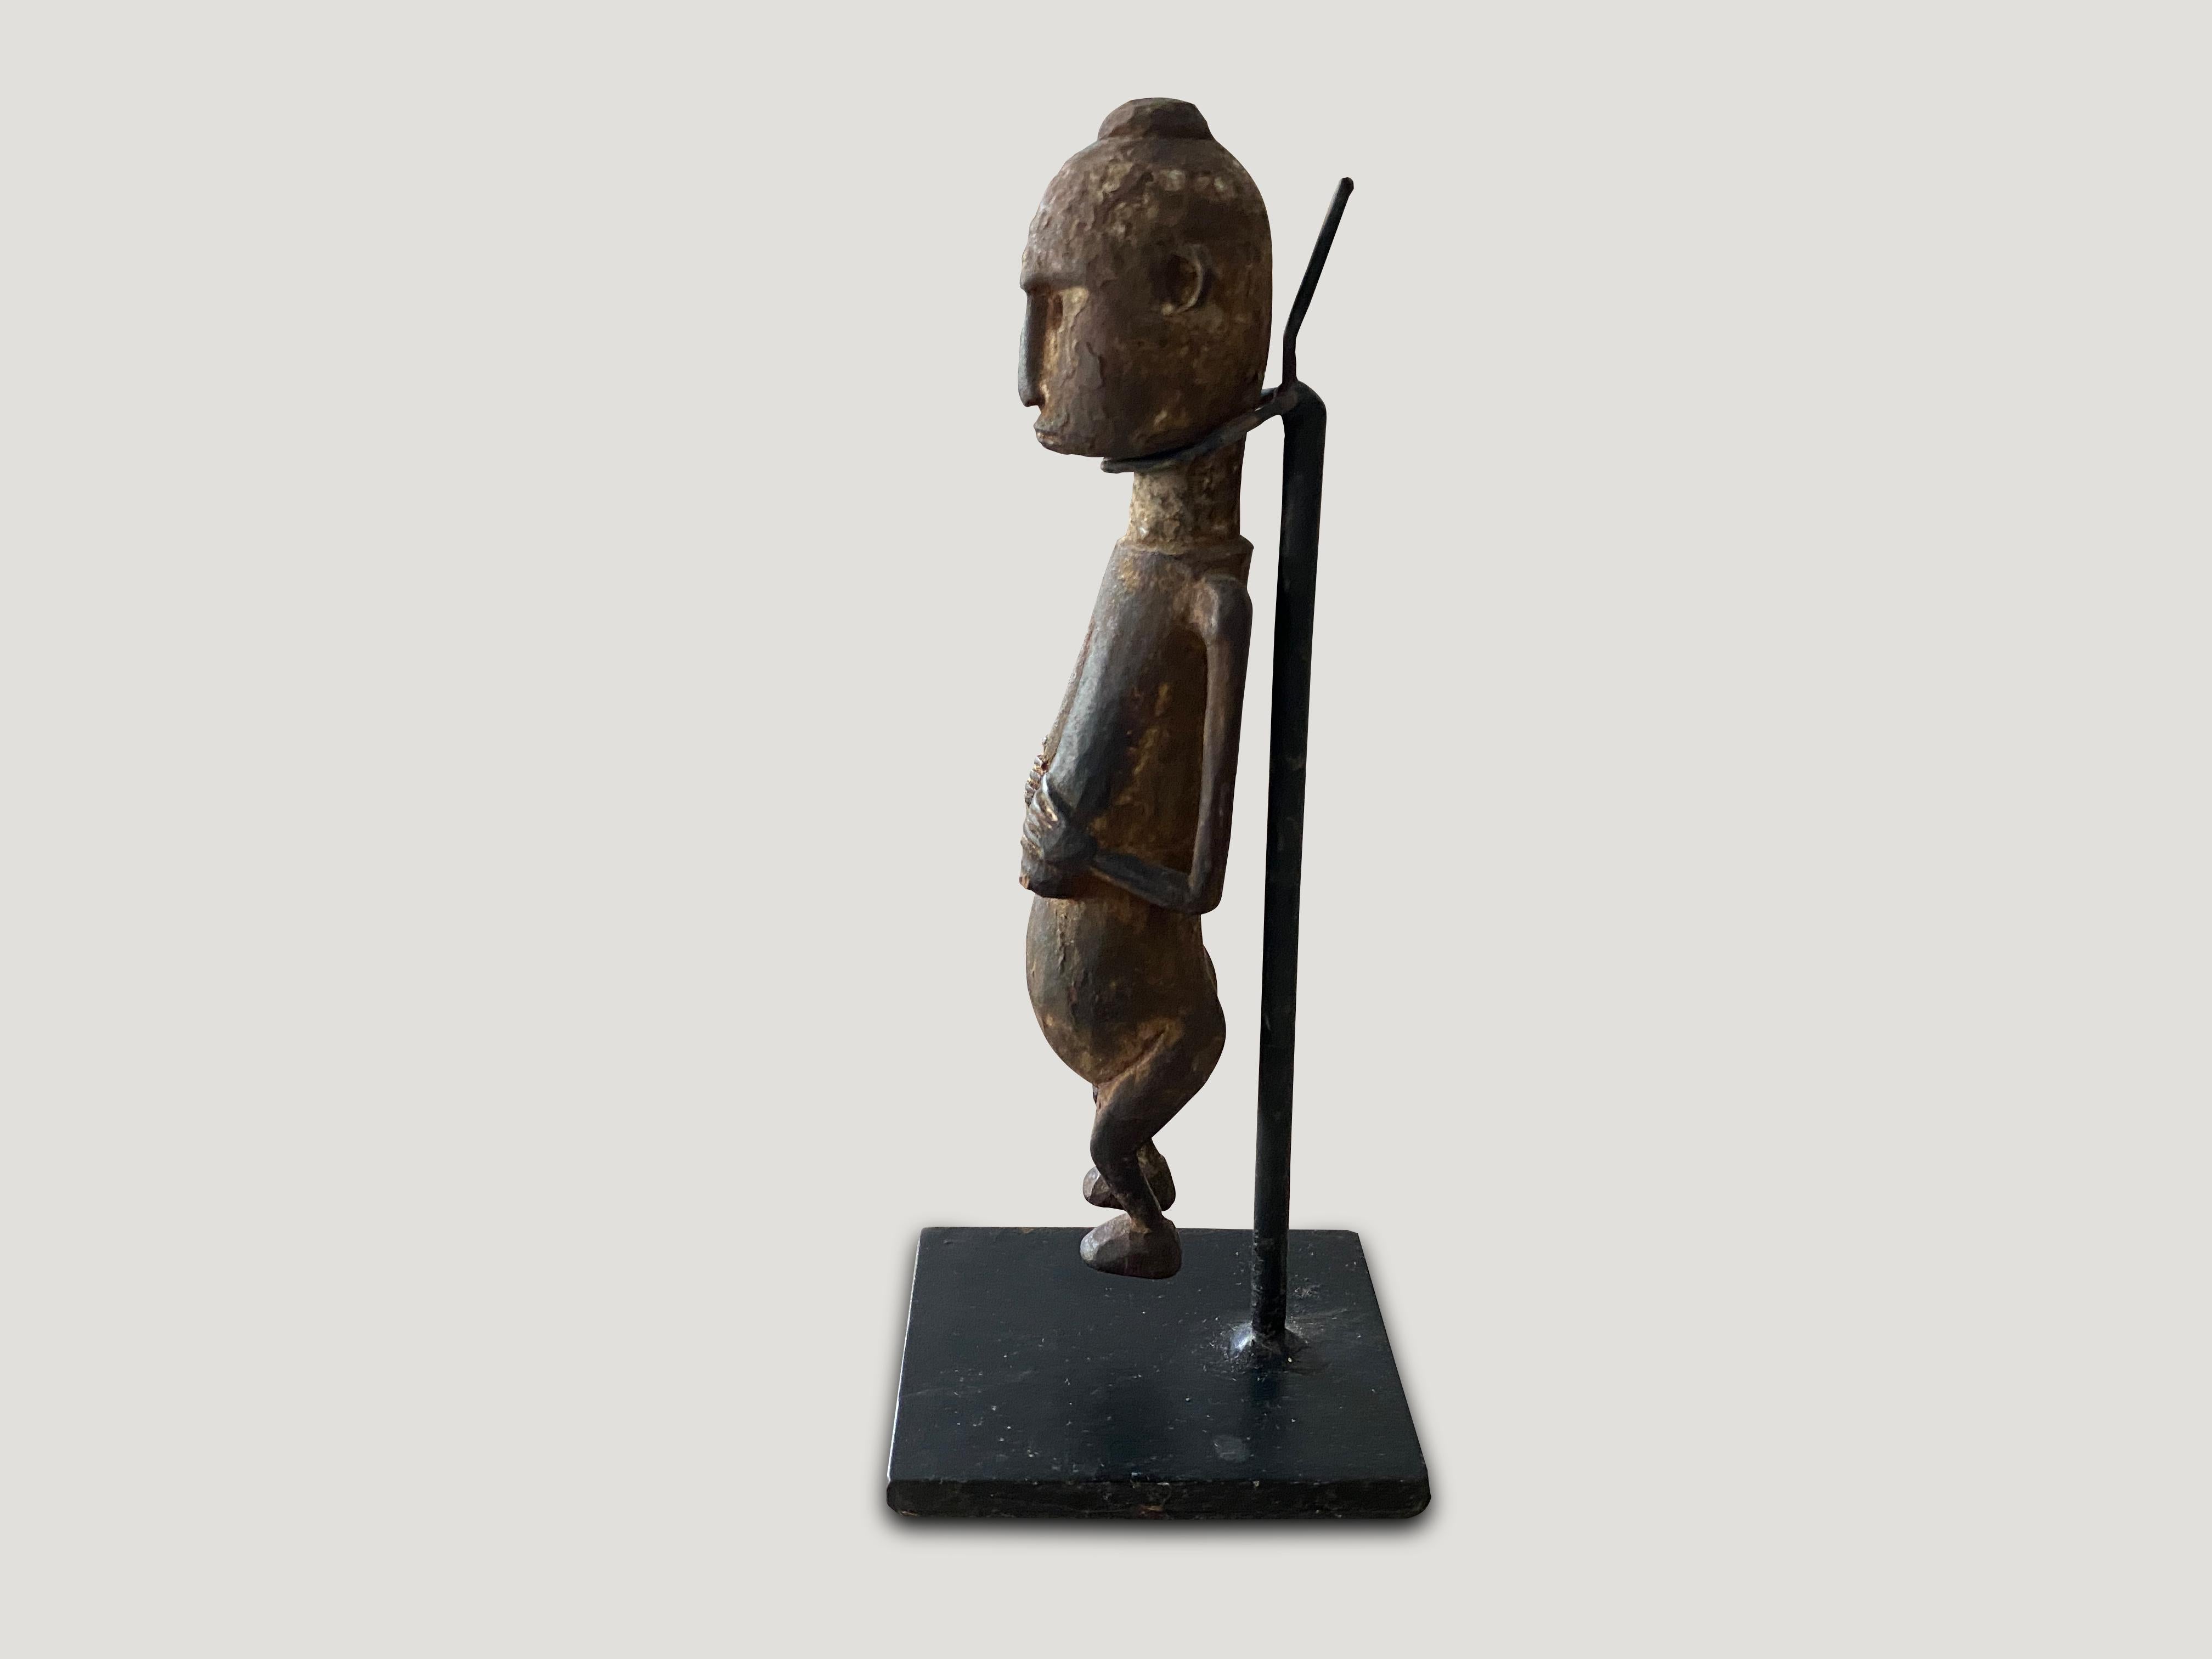 Hand carved wooden figurine of a Primitive man from Sumatra. Set on a modern black metal stand, circa 1950

This figurine was sourced in the spirit of wabi-sabi, a Japanese philosophy that beauty can be found in imperfection and impermanence. It